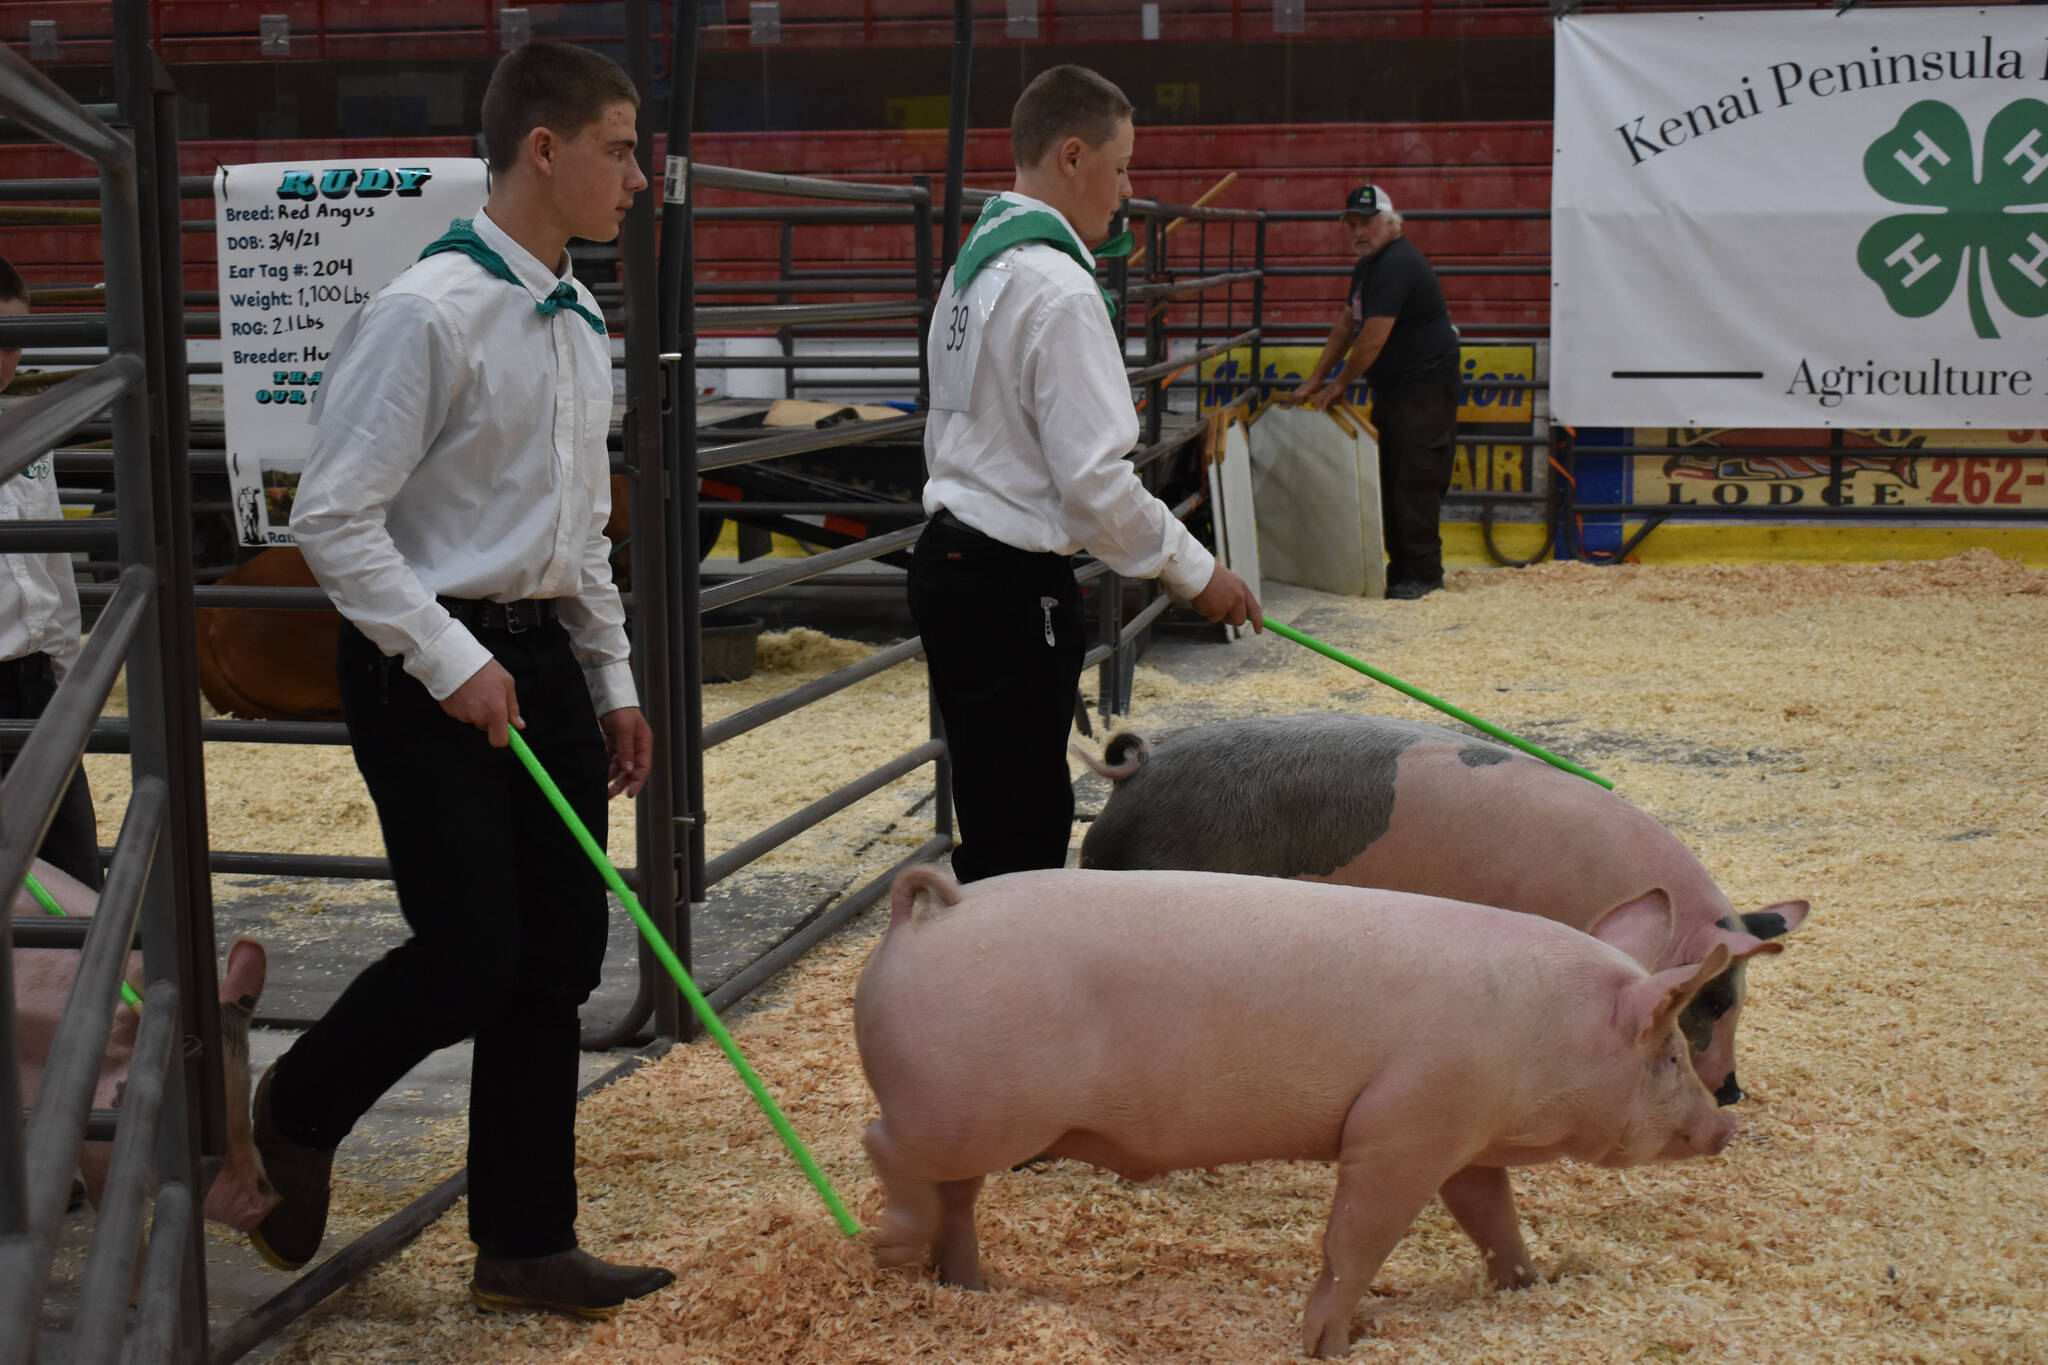 Pigs enter the arena to be shown at the 4-H Agriculture Expo in Soldotna, Alaska, on Aug. 5, 2022 (Jake Dye/Peninsula Clarion)